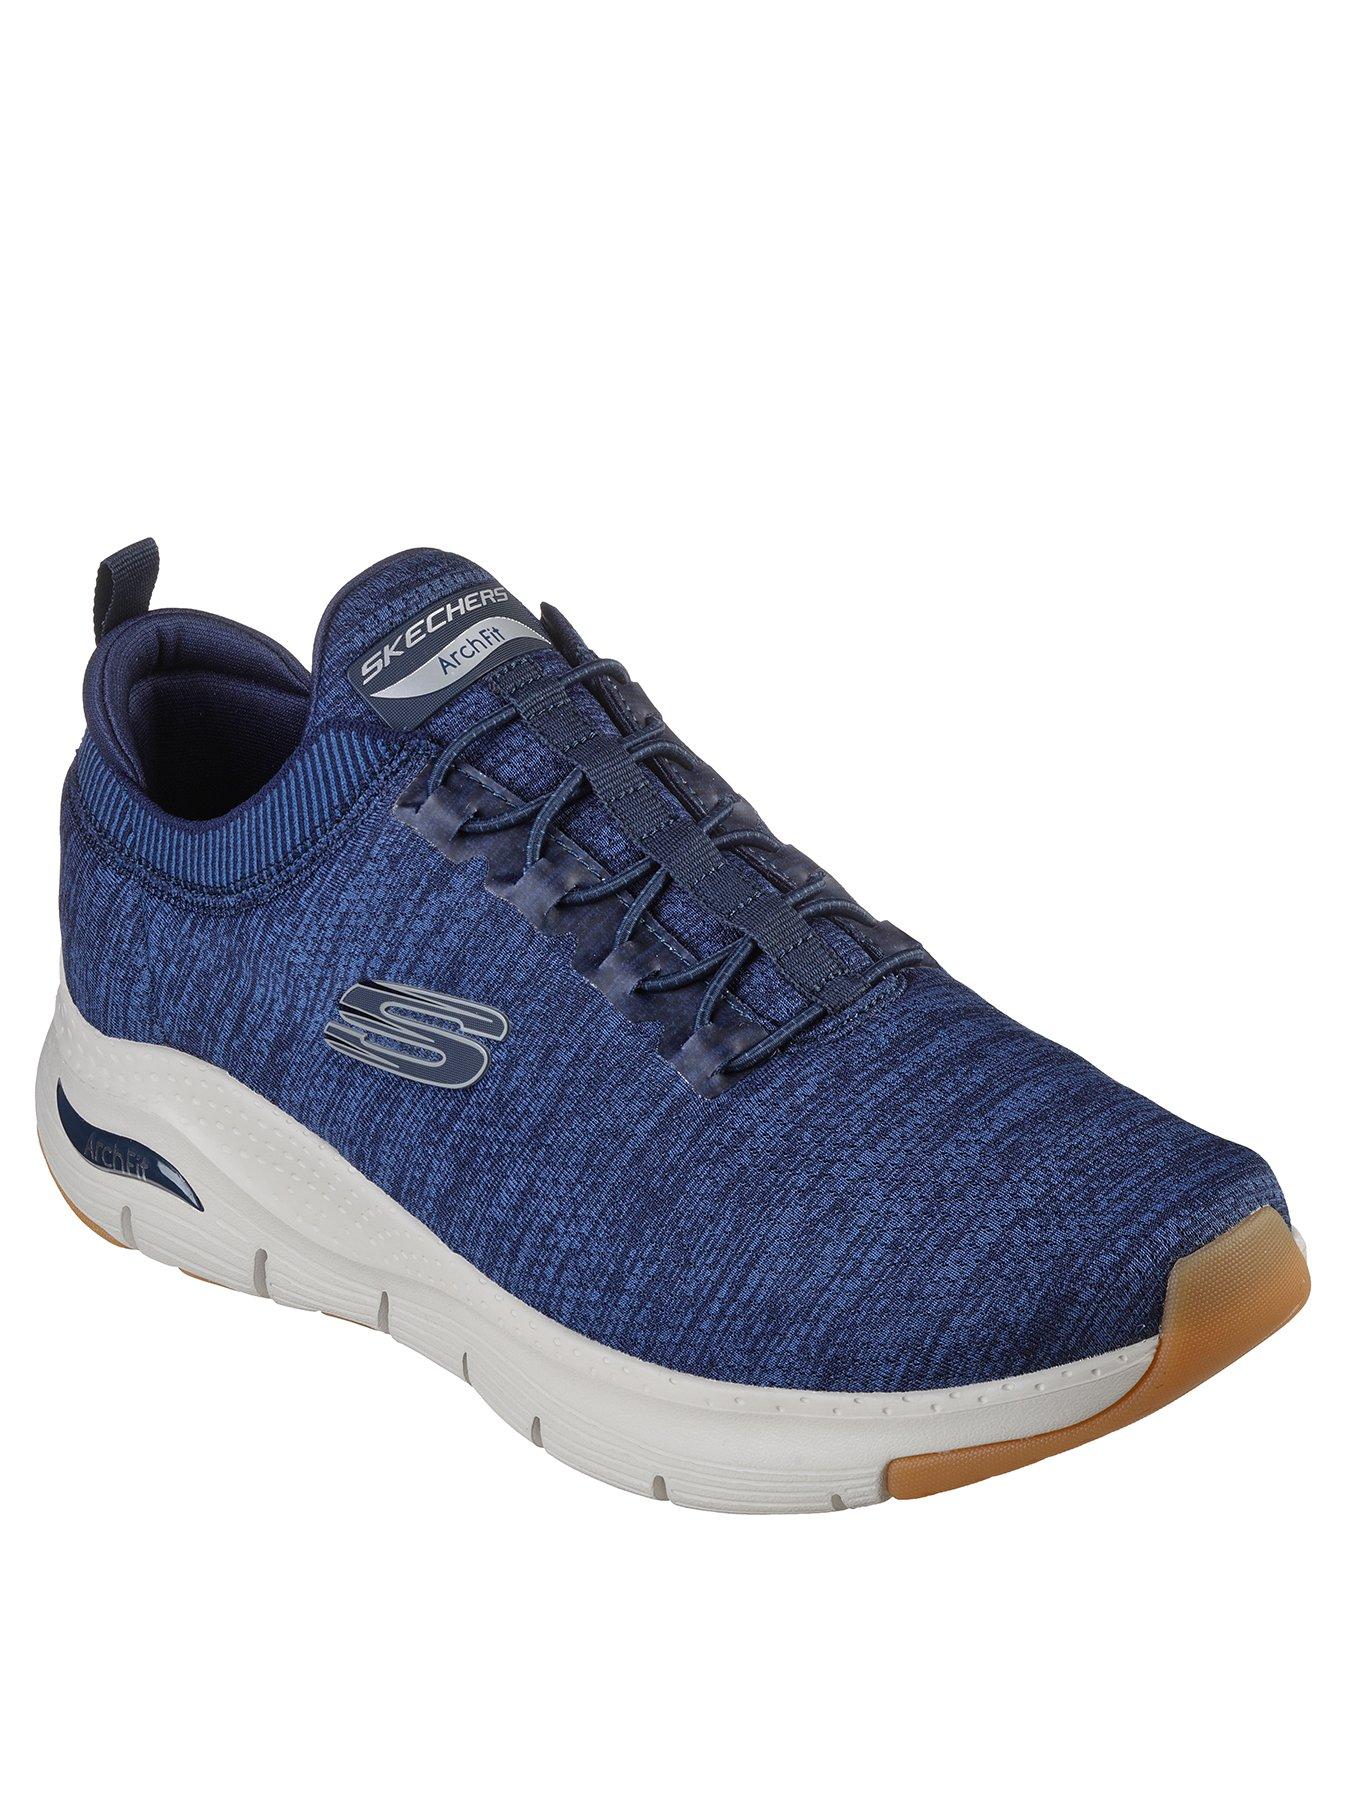 Men Skechers Arch Fit Stretch Lace Slip On Trainer